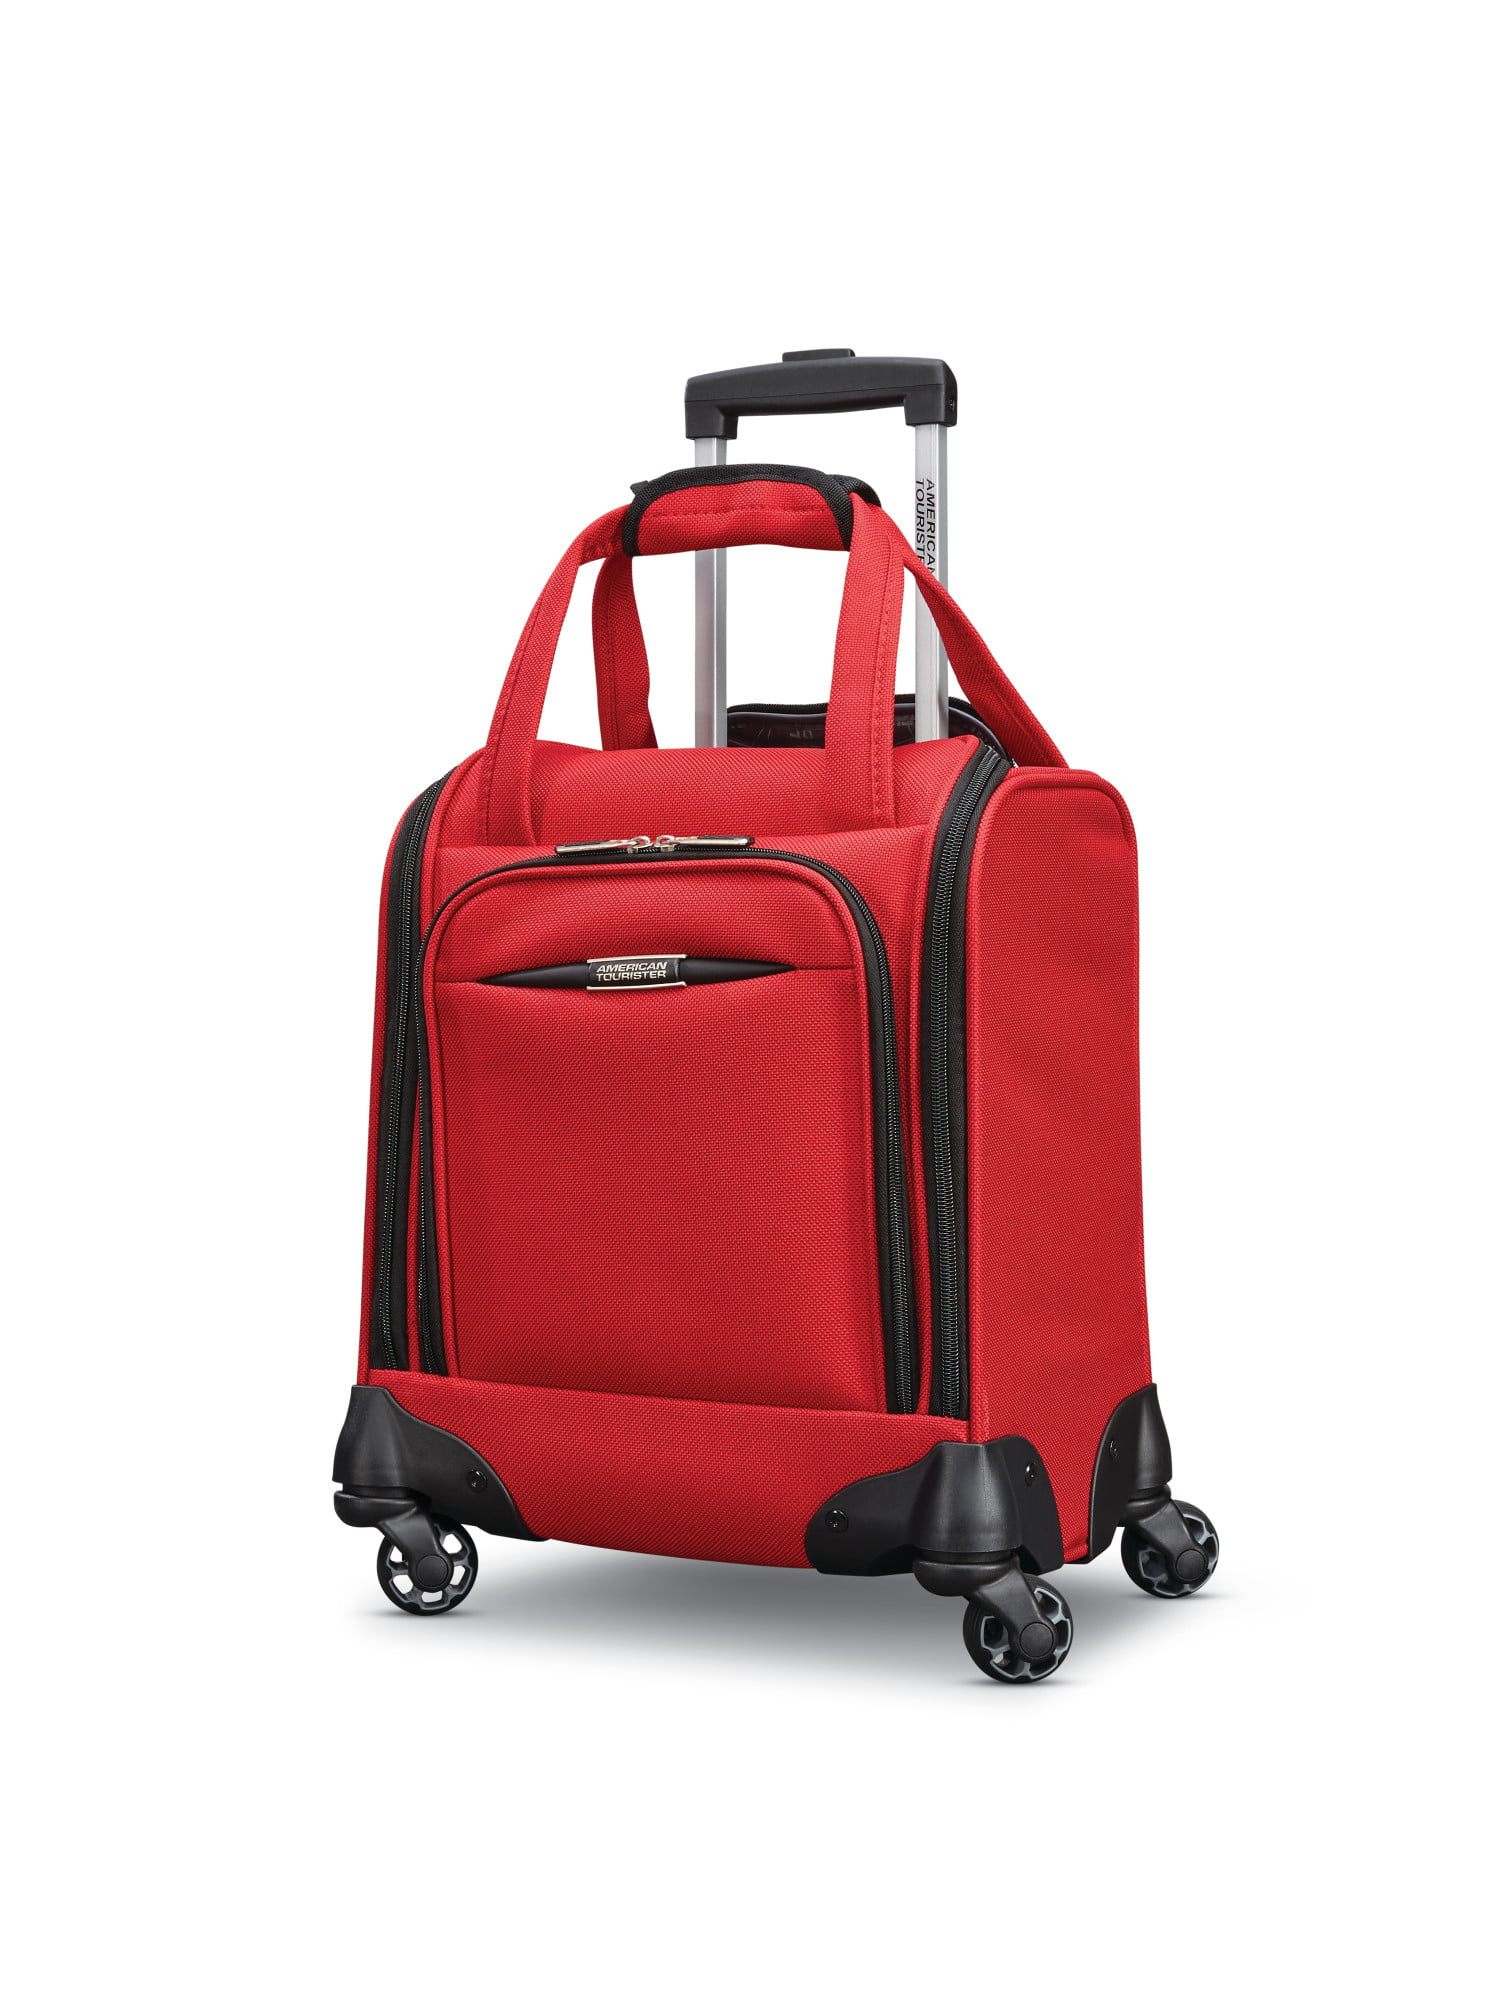 American Tourister Meridian NXT Spinner Tote - Walmart.com